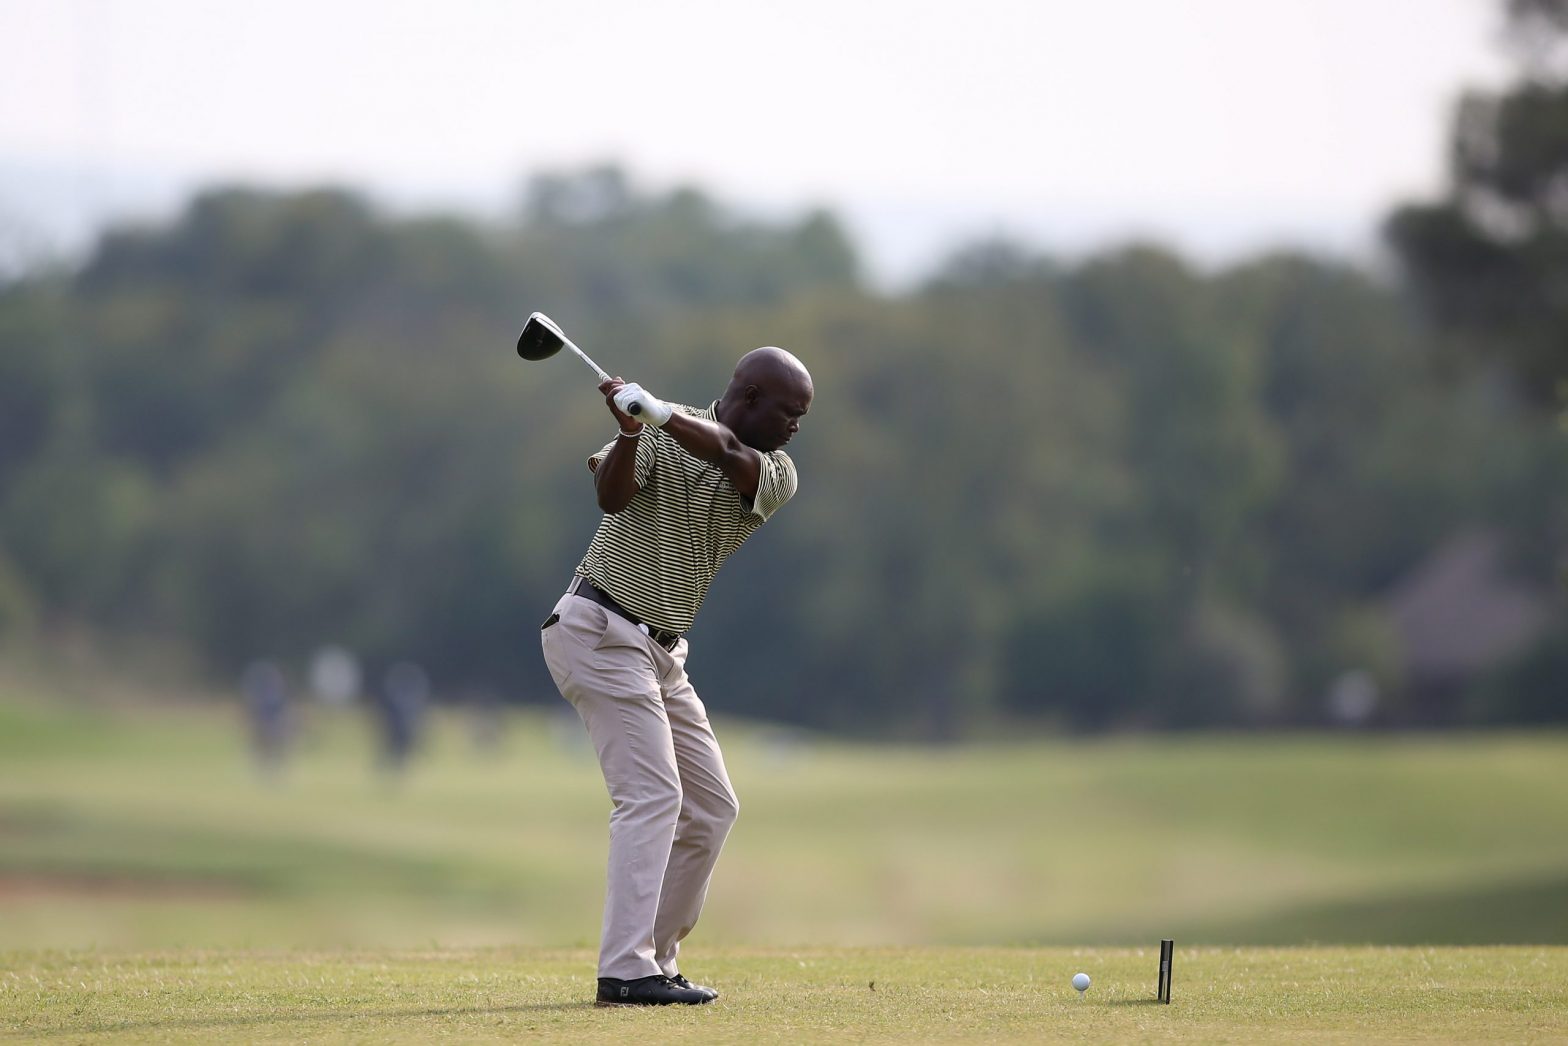 Limpopo Championship keeps driving growth for Limpopo tourism